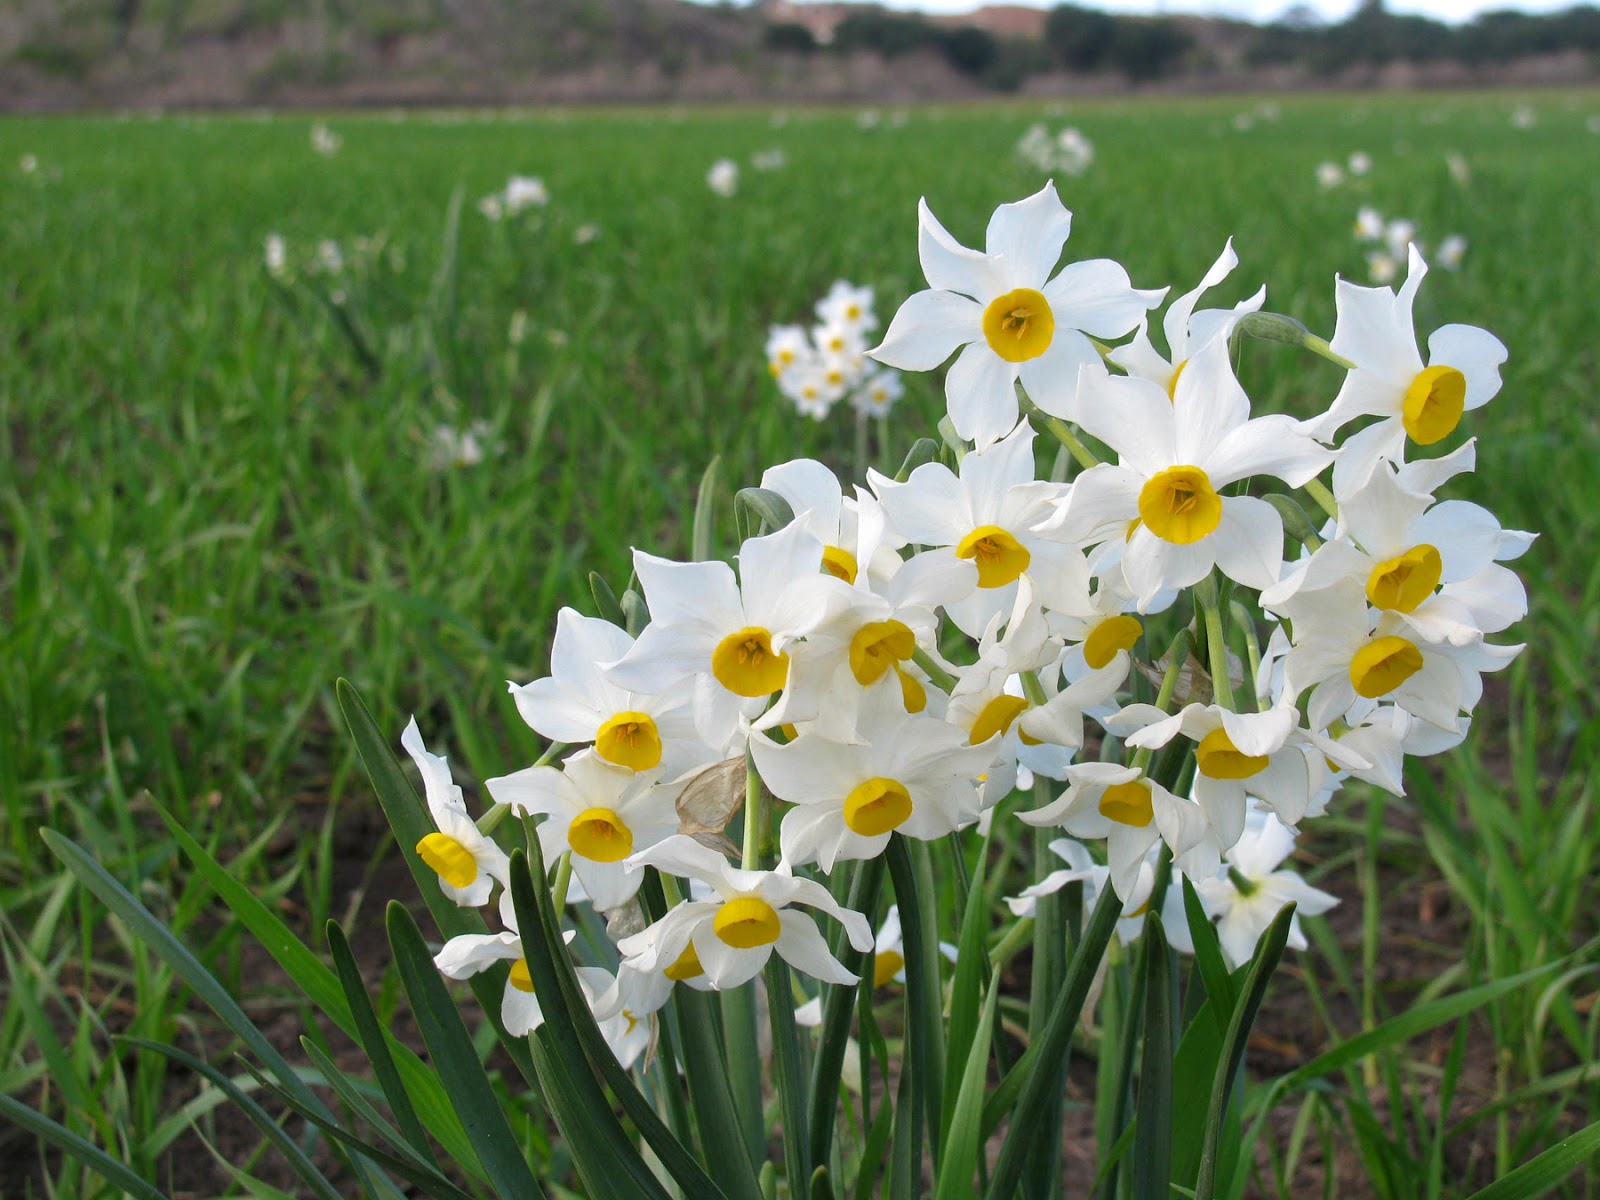 Daffodils - spring flowers also known as narcissi